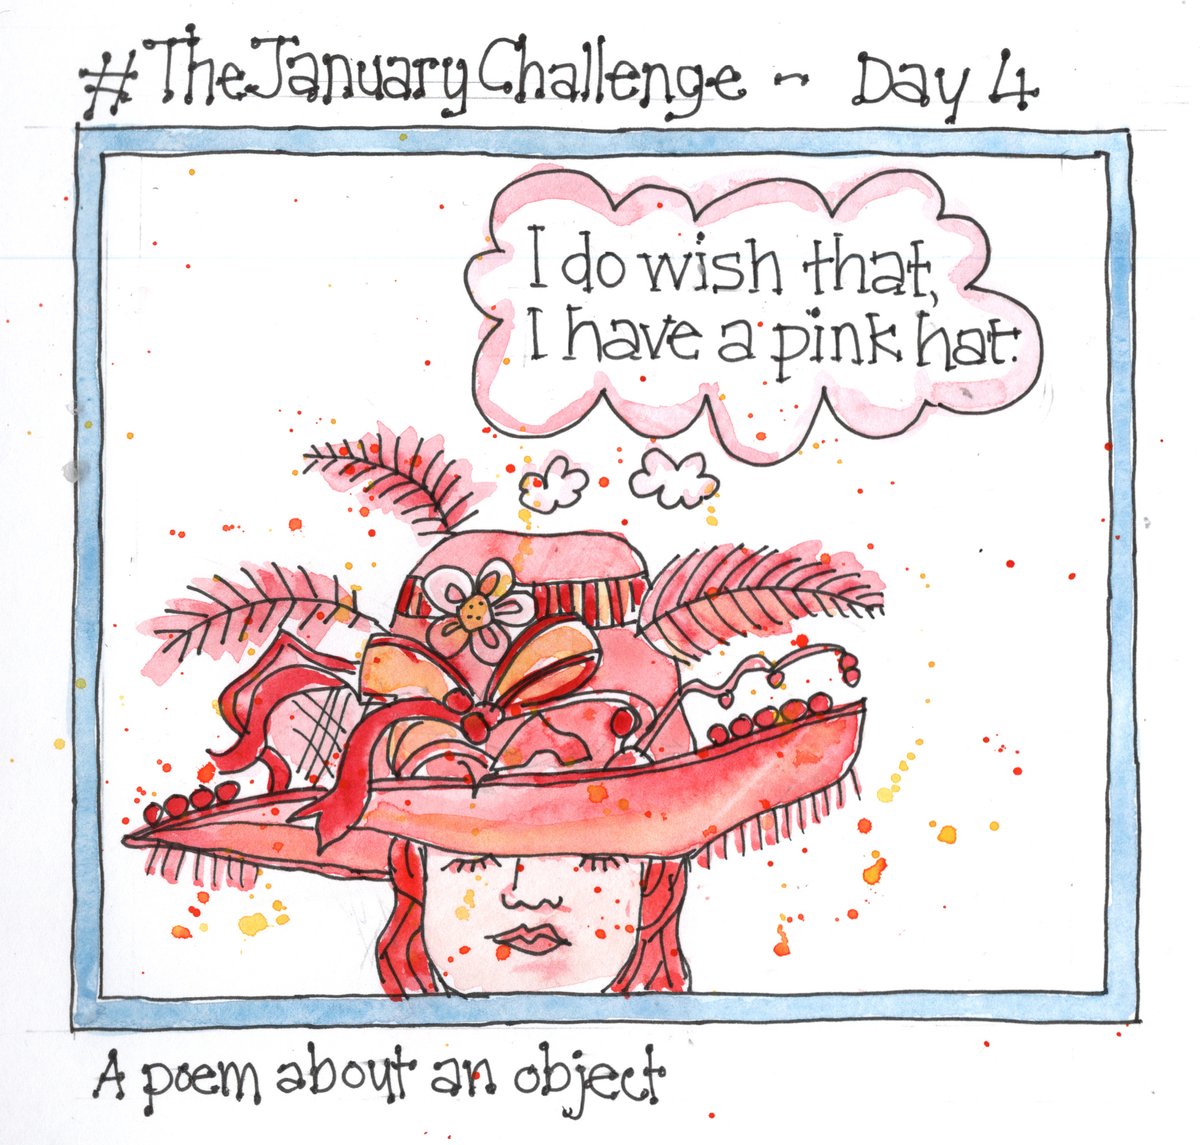 #thejanuarychallenge #2024 #Day4
Not sure I followed the task but never mind, too late now. Think there was something about an object and a poet?
But I can dream about a big red hat, sitting by the river watching the boats go by. 
#64MillionArtists #poetry